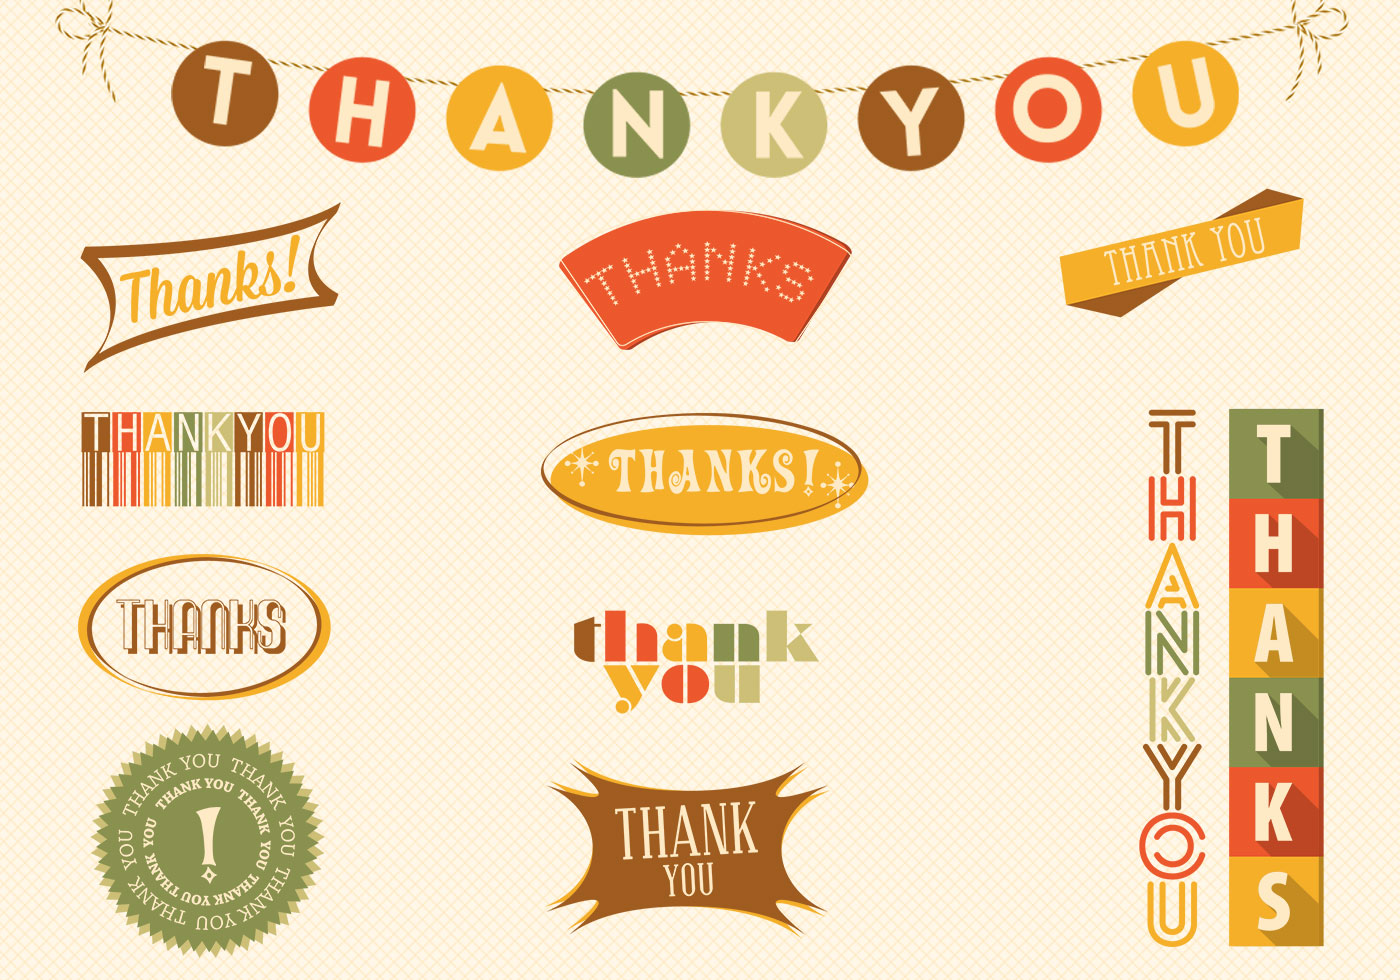 vector free download thank you - photo #17